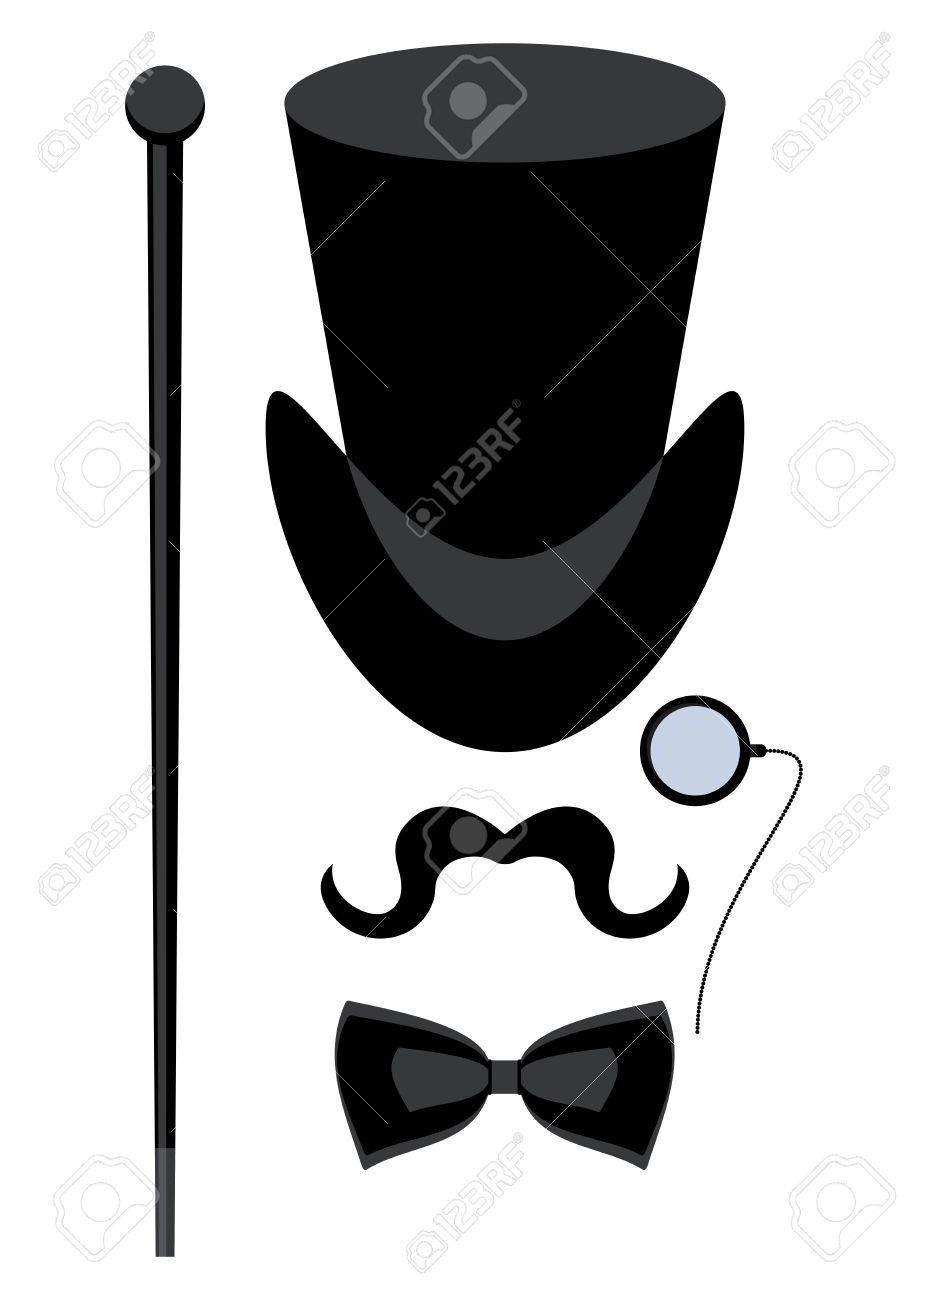 1206 Top Hat free clipart.